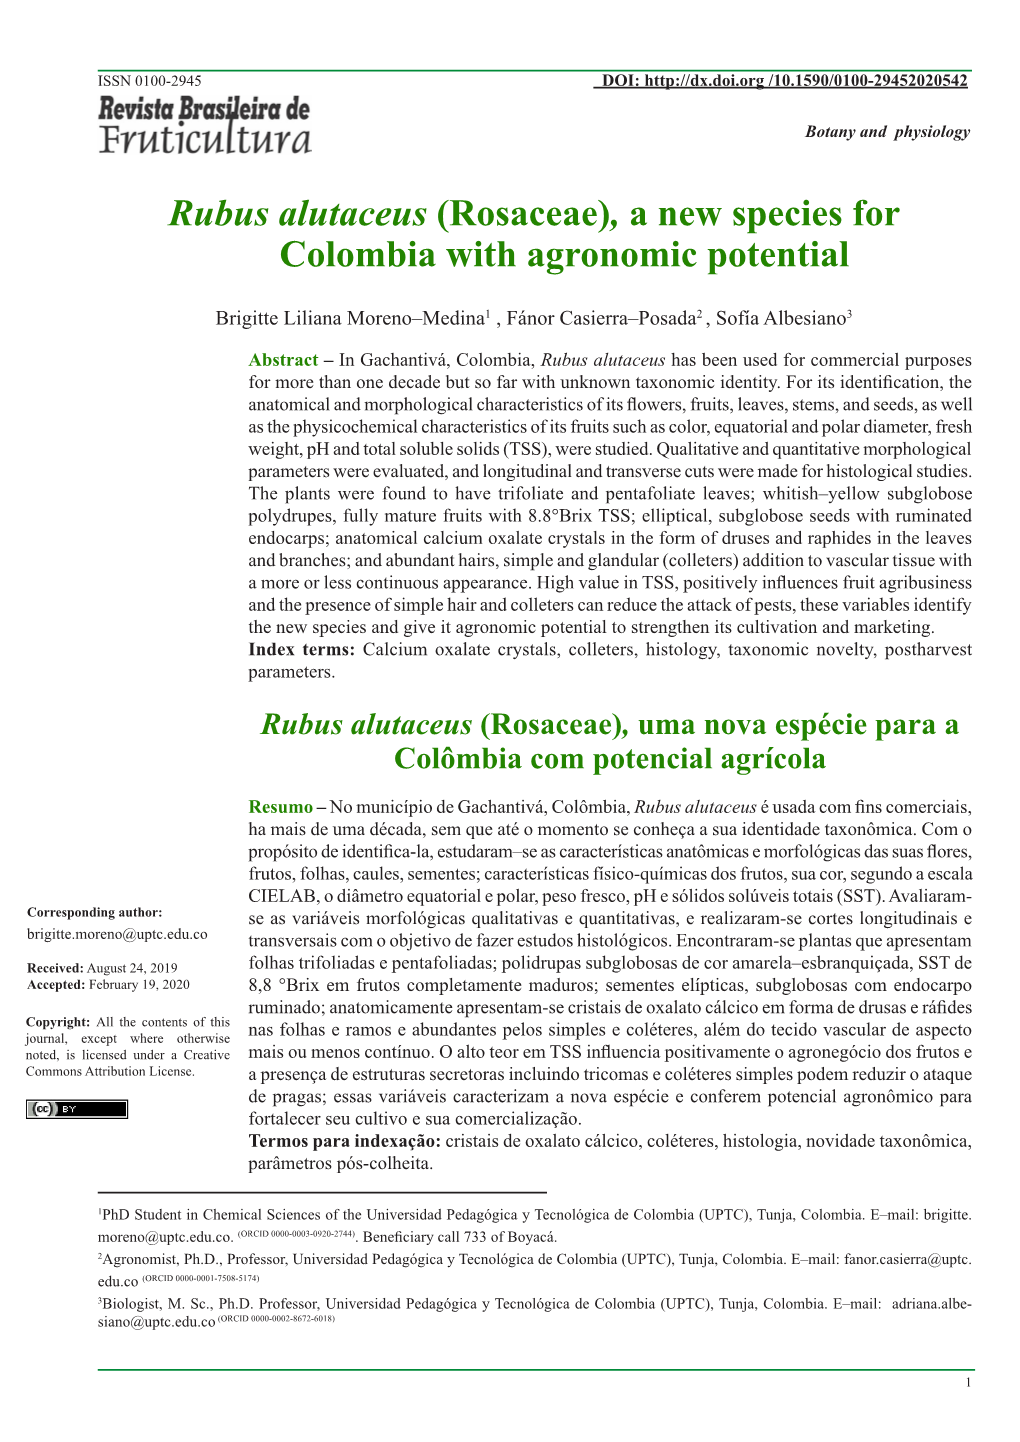 Rubus Alutaceus (Rosaceae), a New Species for Colombia with Agronomic Potential